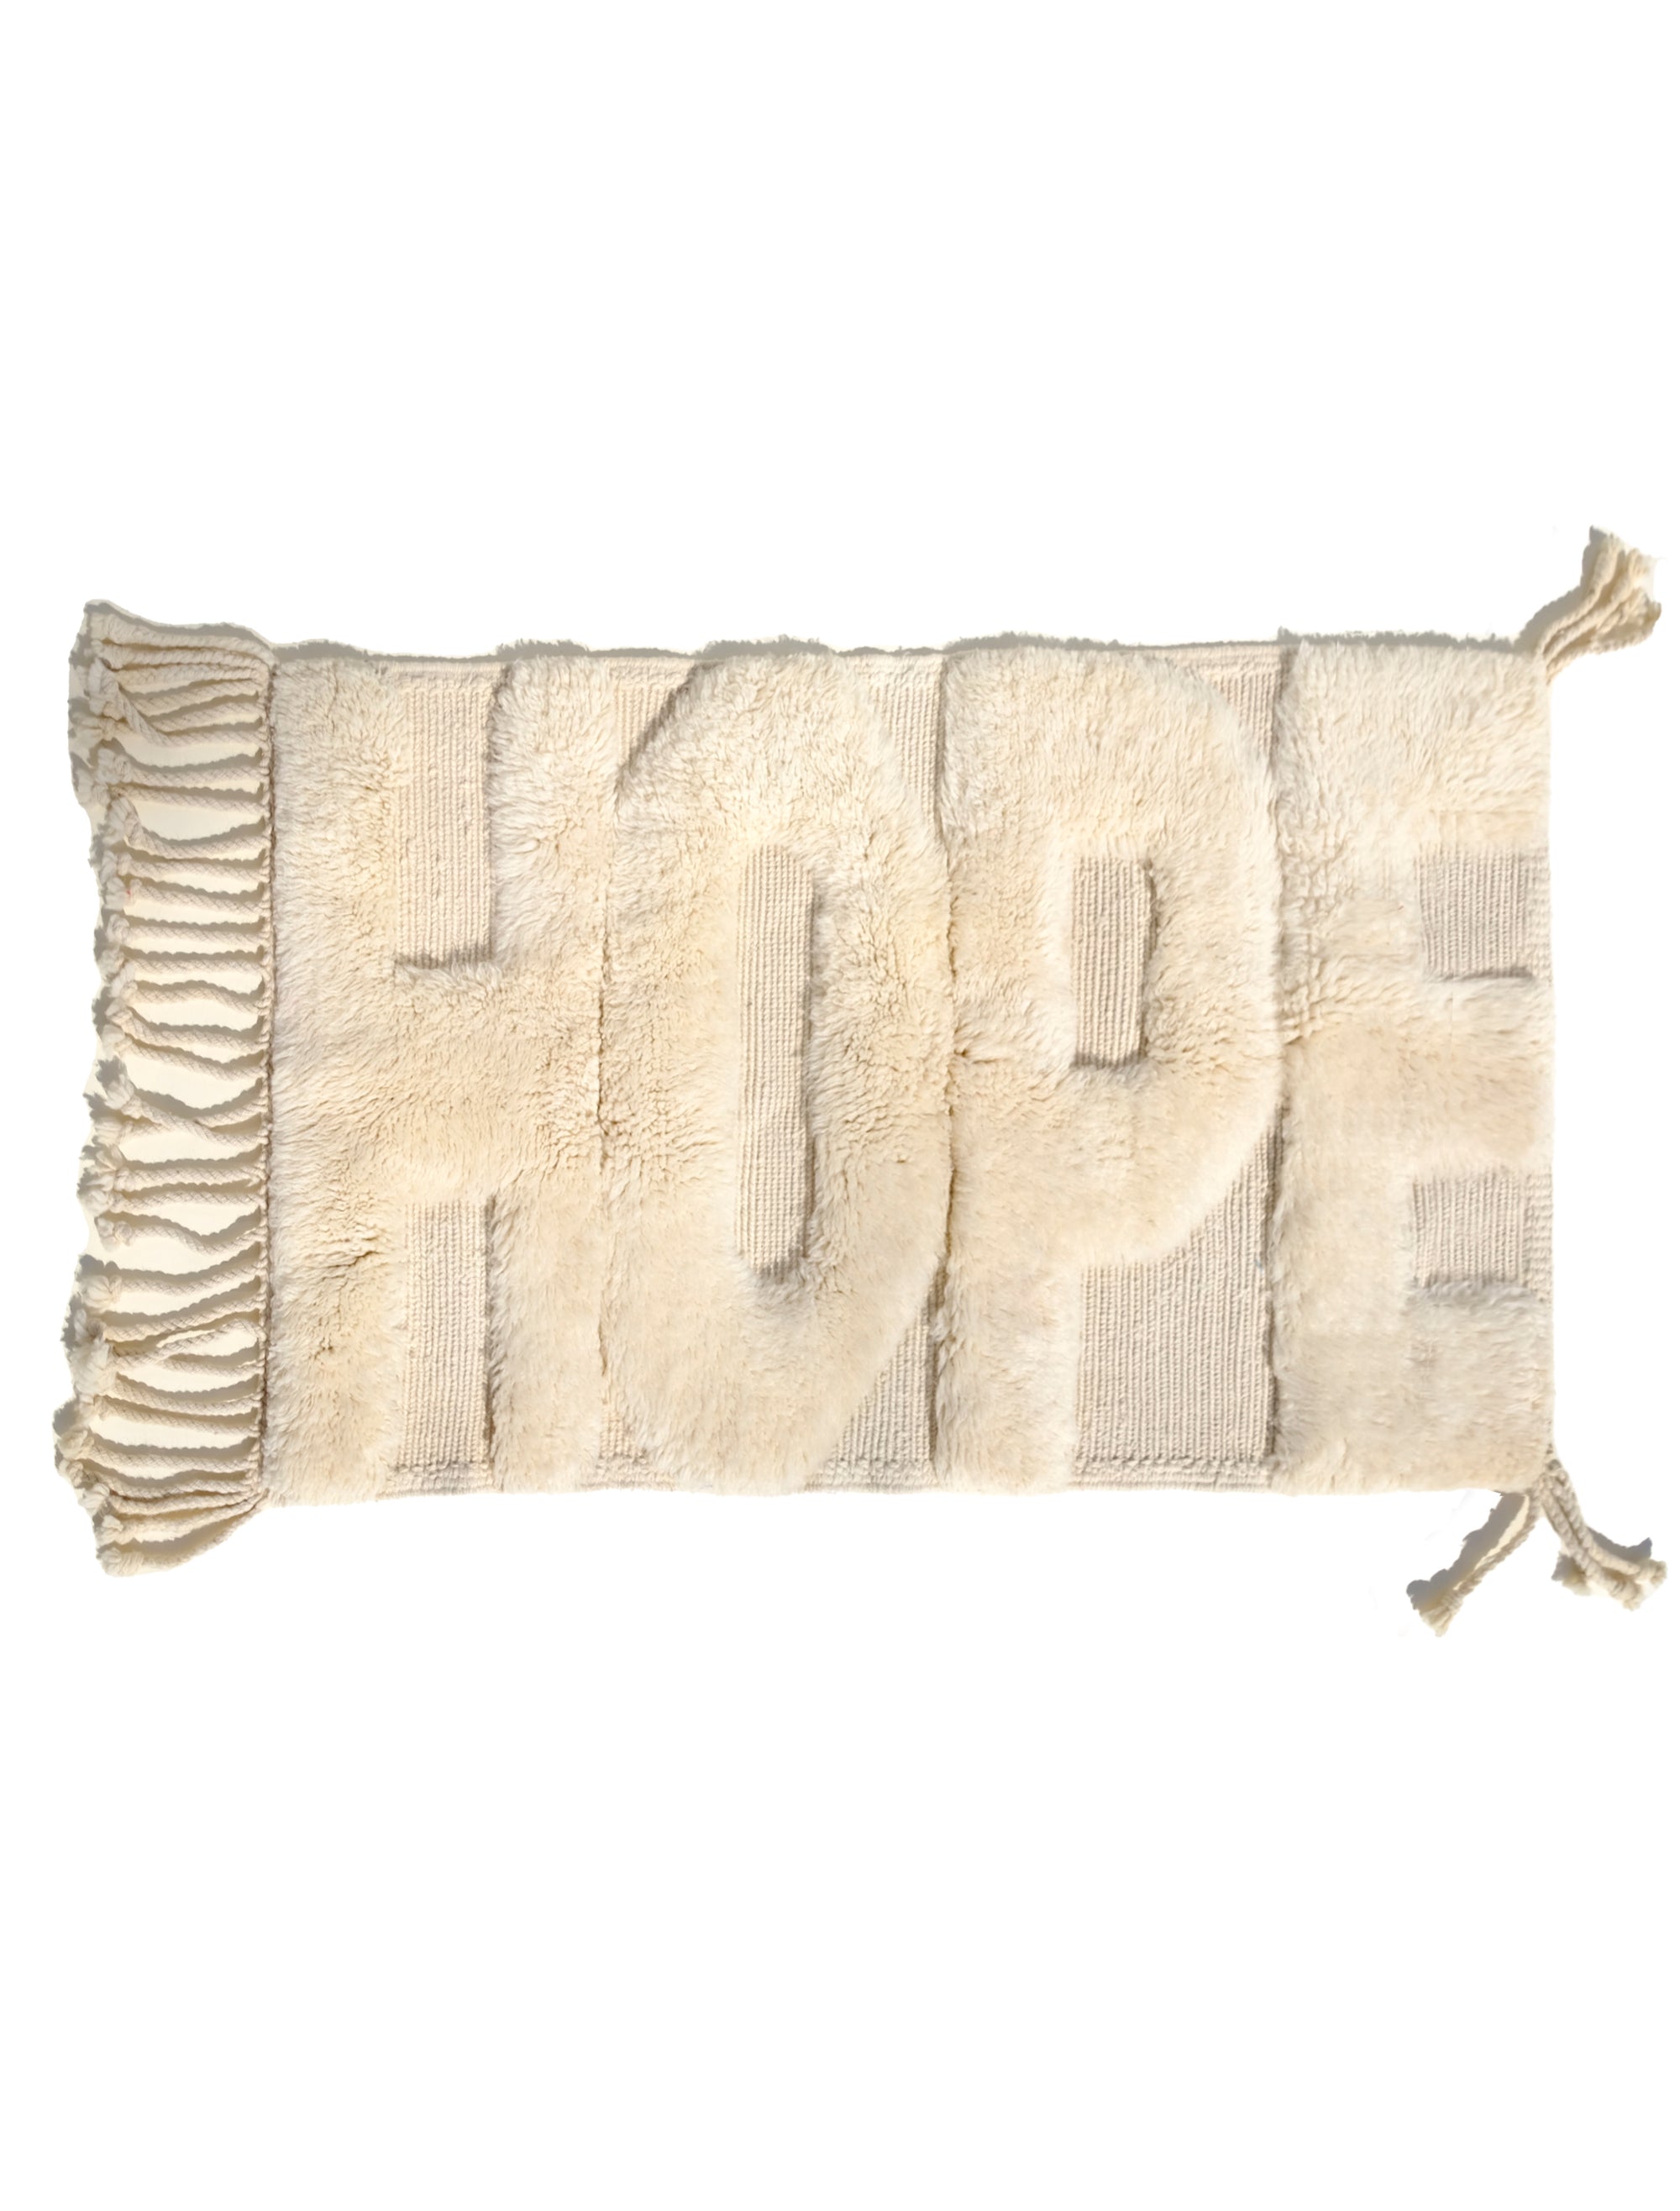 Introducing our 'Ivory Fuzzed Hope Rug,' a masterful blend of timeless sophistication and vibrant playfulness. Crafted with meticulous care, this rug features bold knotted 'Hope' letters that bring a touch of uniqueness to your space. The charming texture and spirited design infuse your home with positive energy, creating a perfect balance of classic elegance and joyful exuberance.